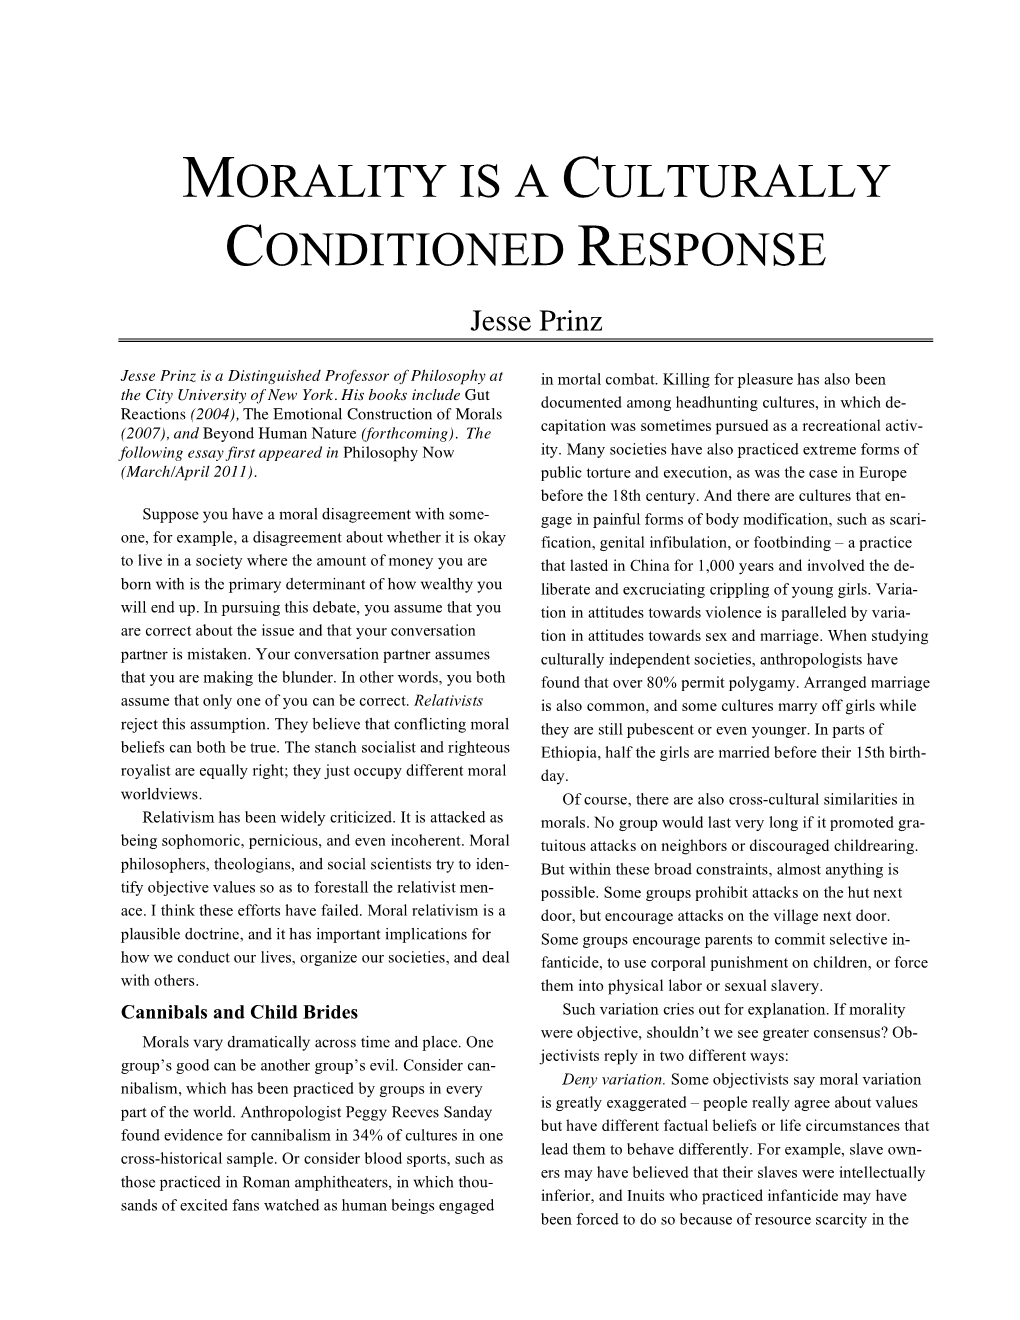 MORALITY IS a CULTURALLY CONDITIONED RESPONSE Jesse Prinz